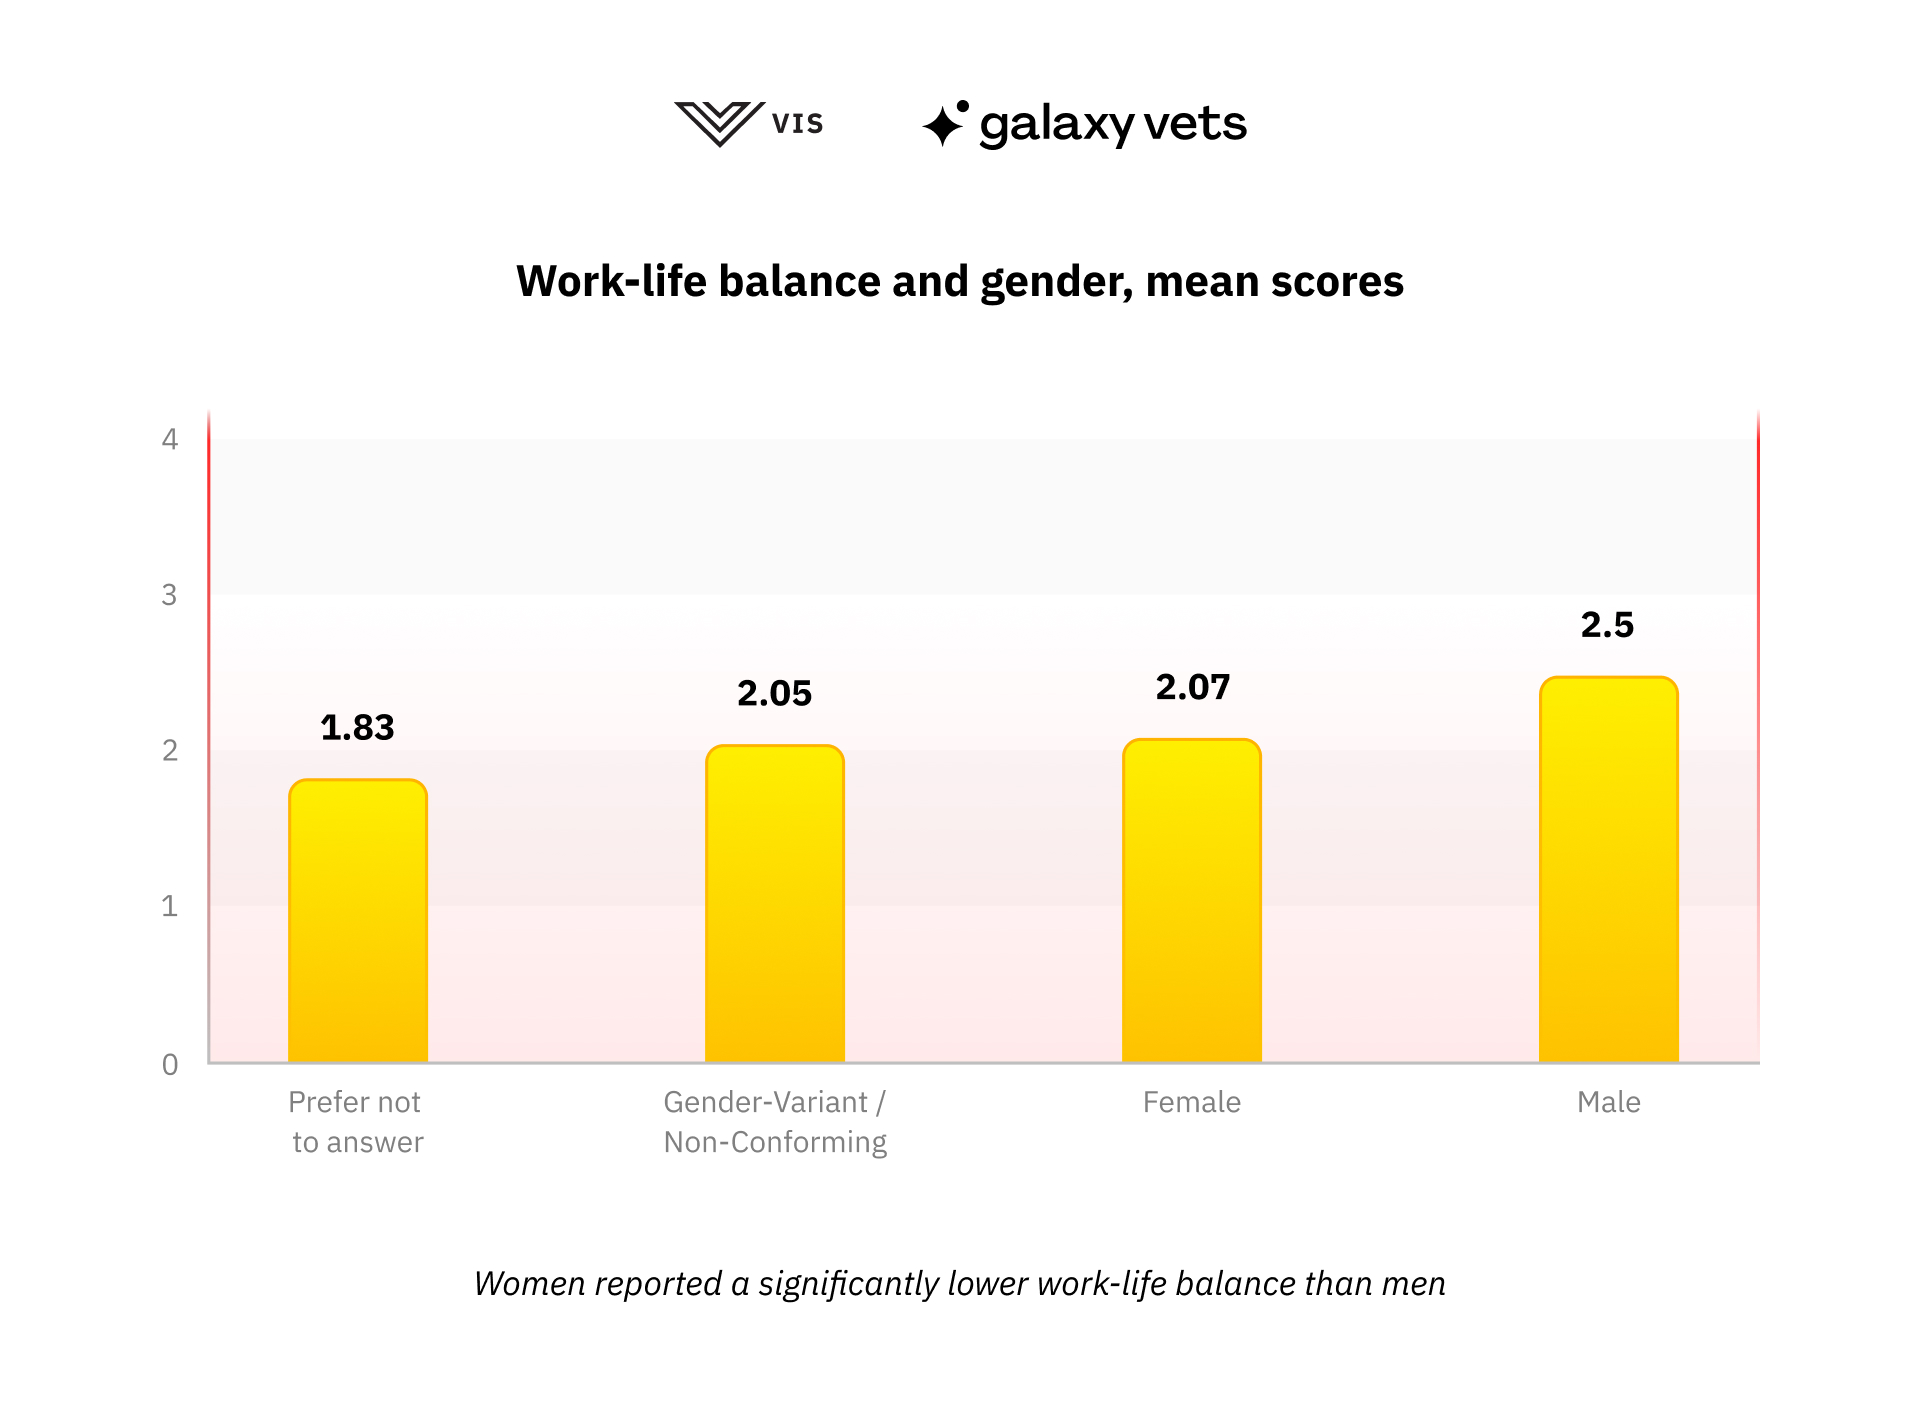 women reported a significantly lower work time balance than men